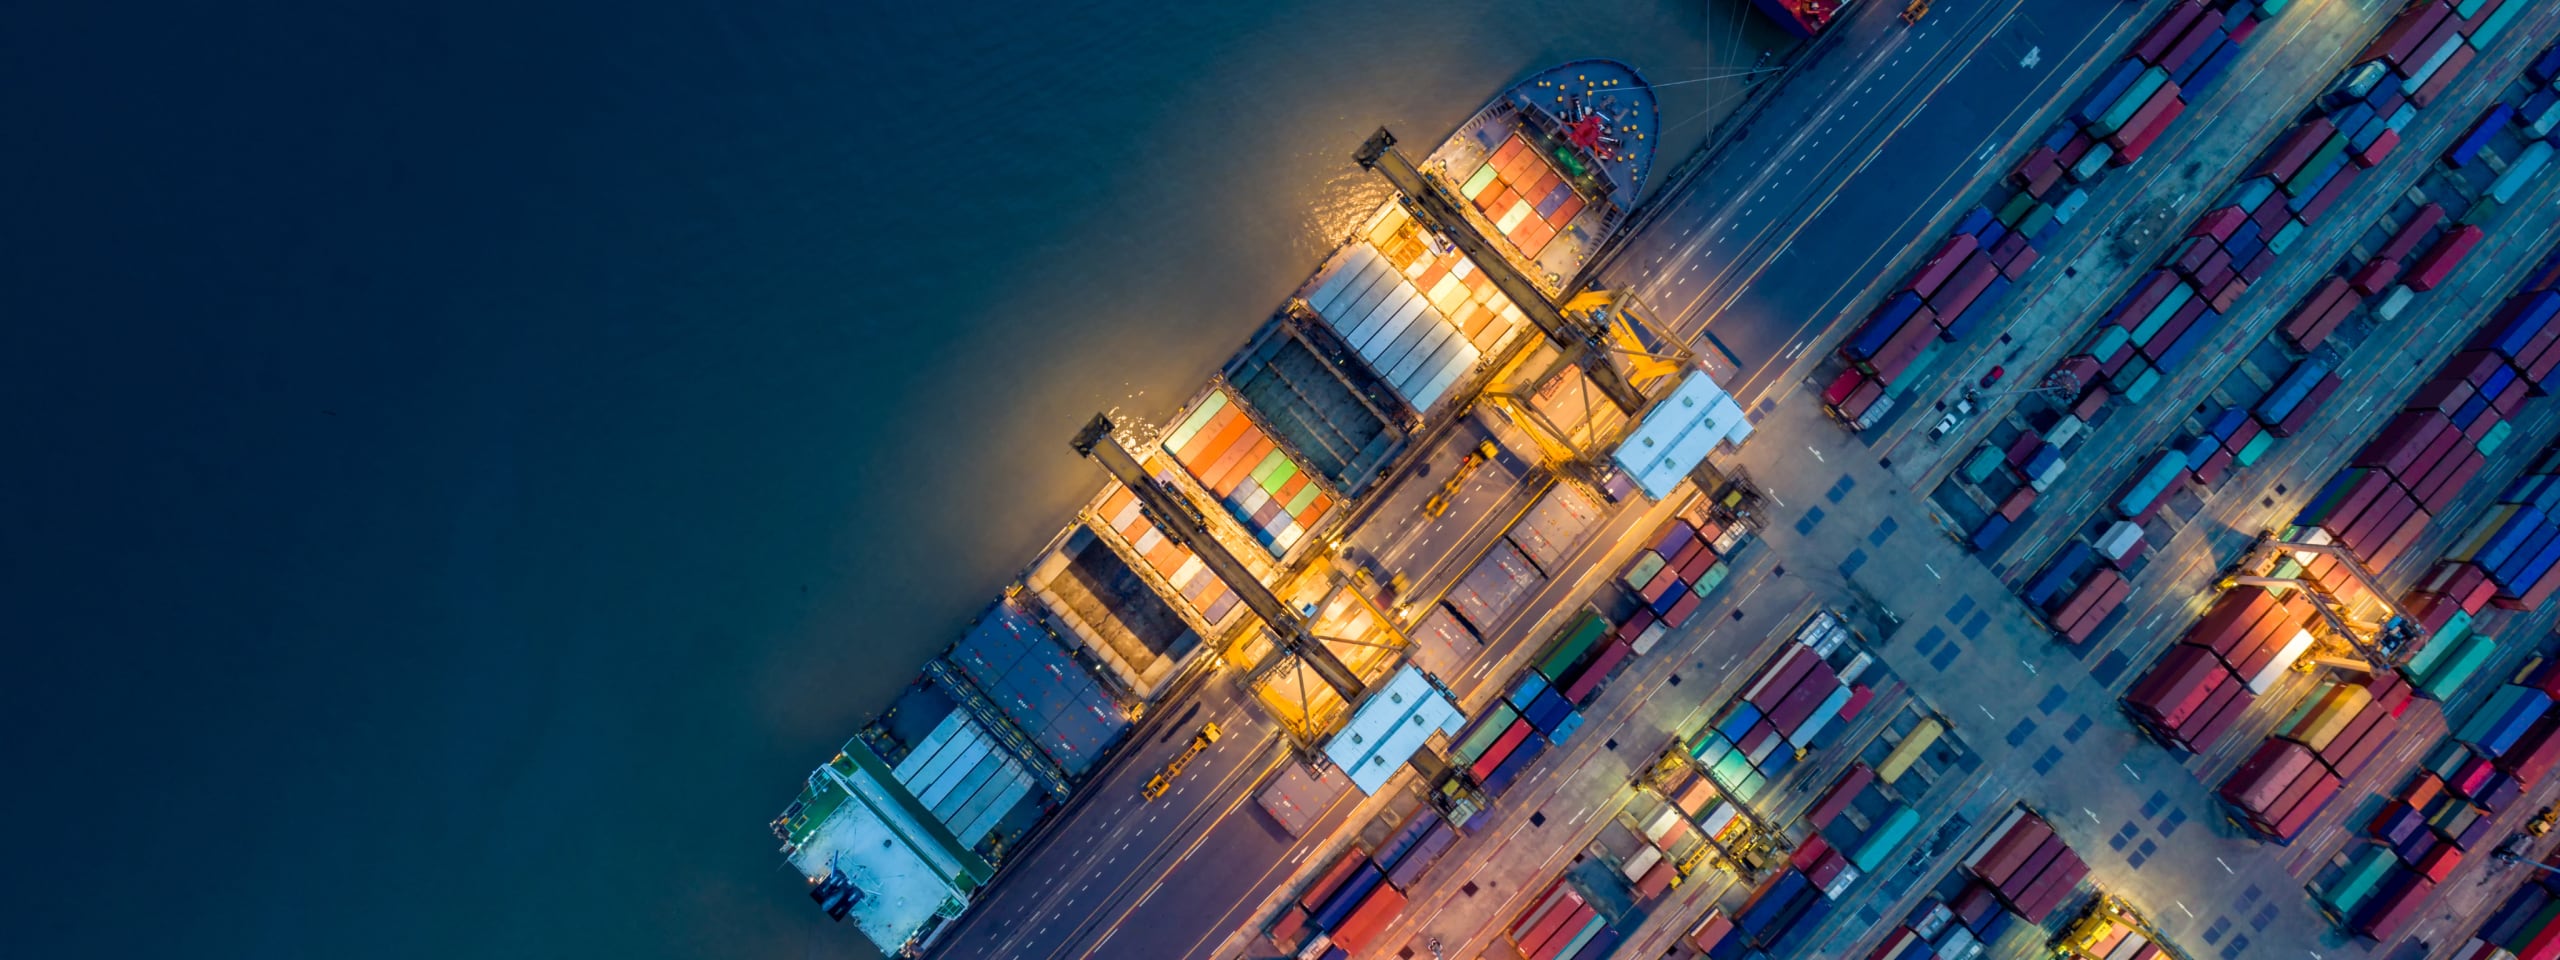 Aerial view of a container ship at port in rippling dark blue waters, docked at a shipping yard warmly lit for nighttime with many colorful cargo containers 